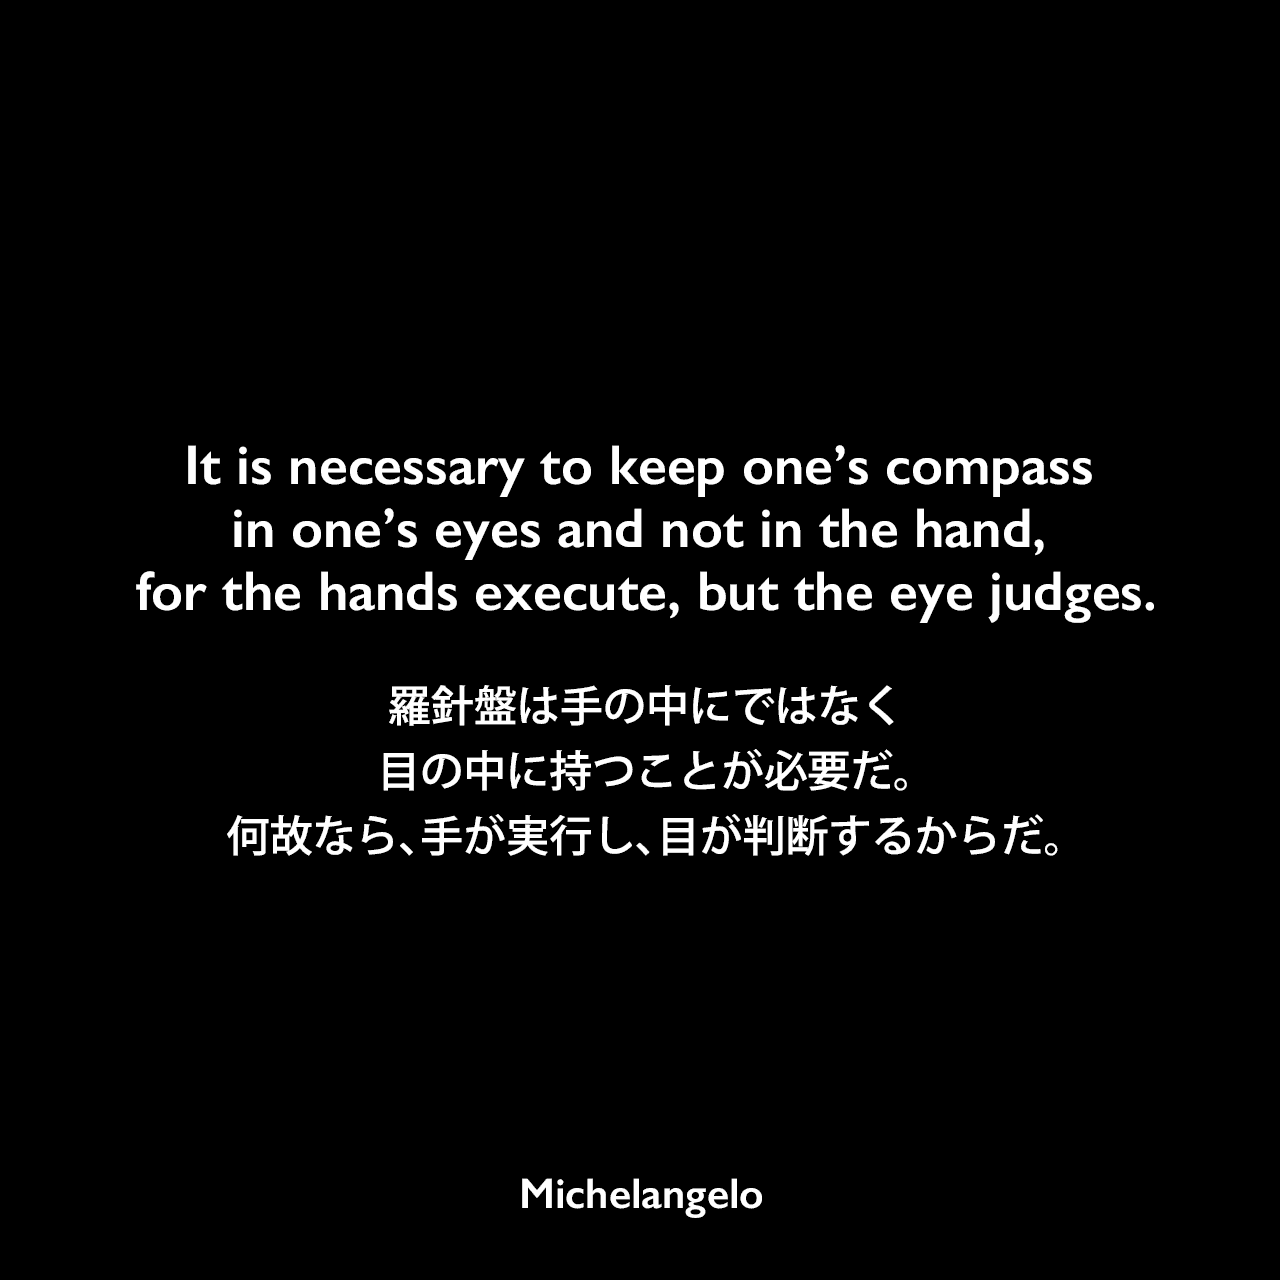 It is necessary to keep one’s compass in one’s eyes and not in the hand, for the hands execute, but the eye judges.羅針盤は手の中にではなく、目の中に持つことが必要だ。何故なら、手が実行し、目が判断するからだ。Michelangelo